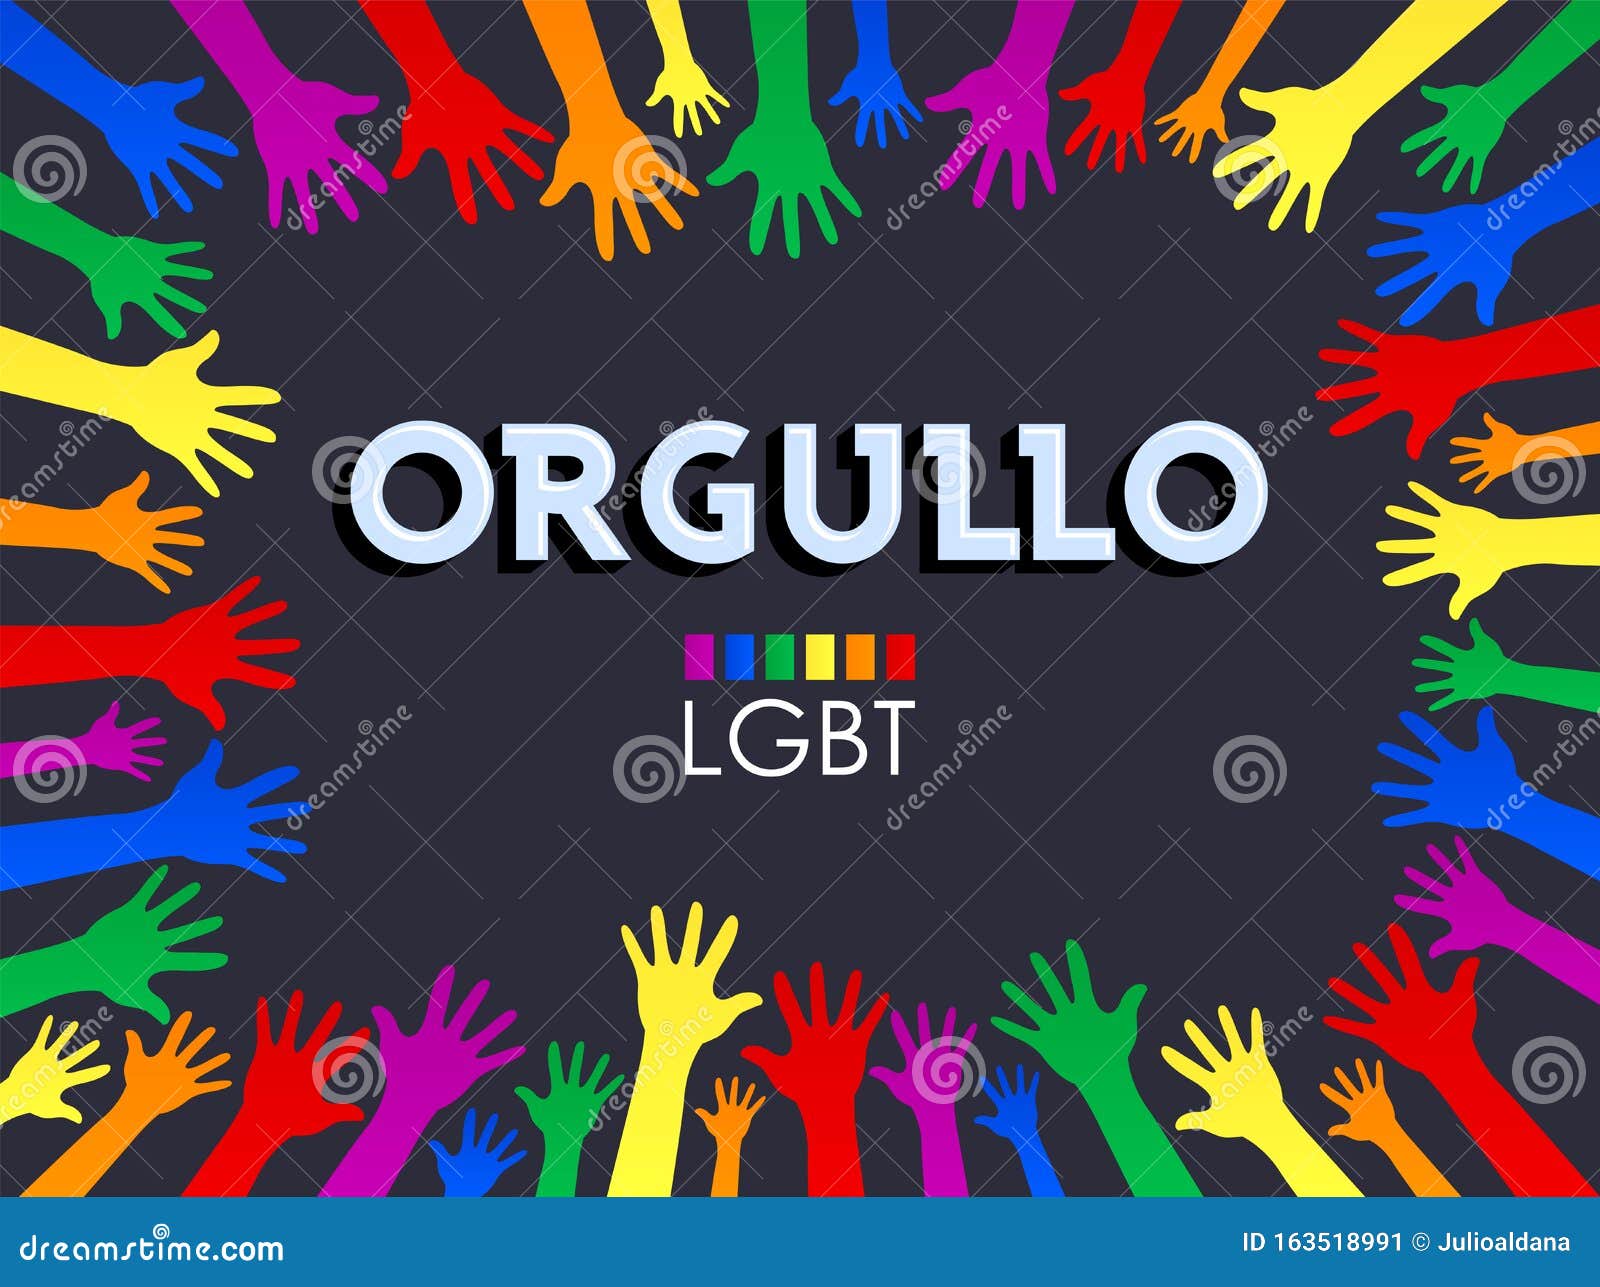 orgullo, pride spanish text lgbt support  banner .